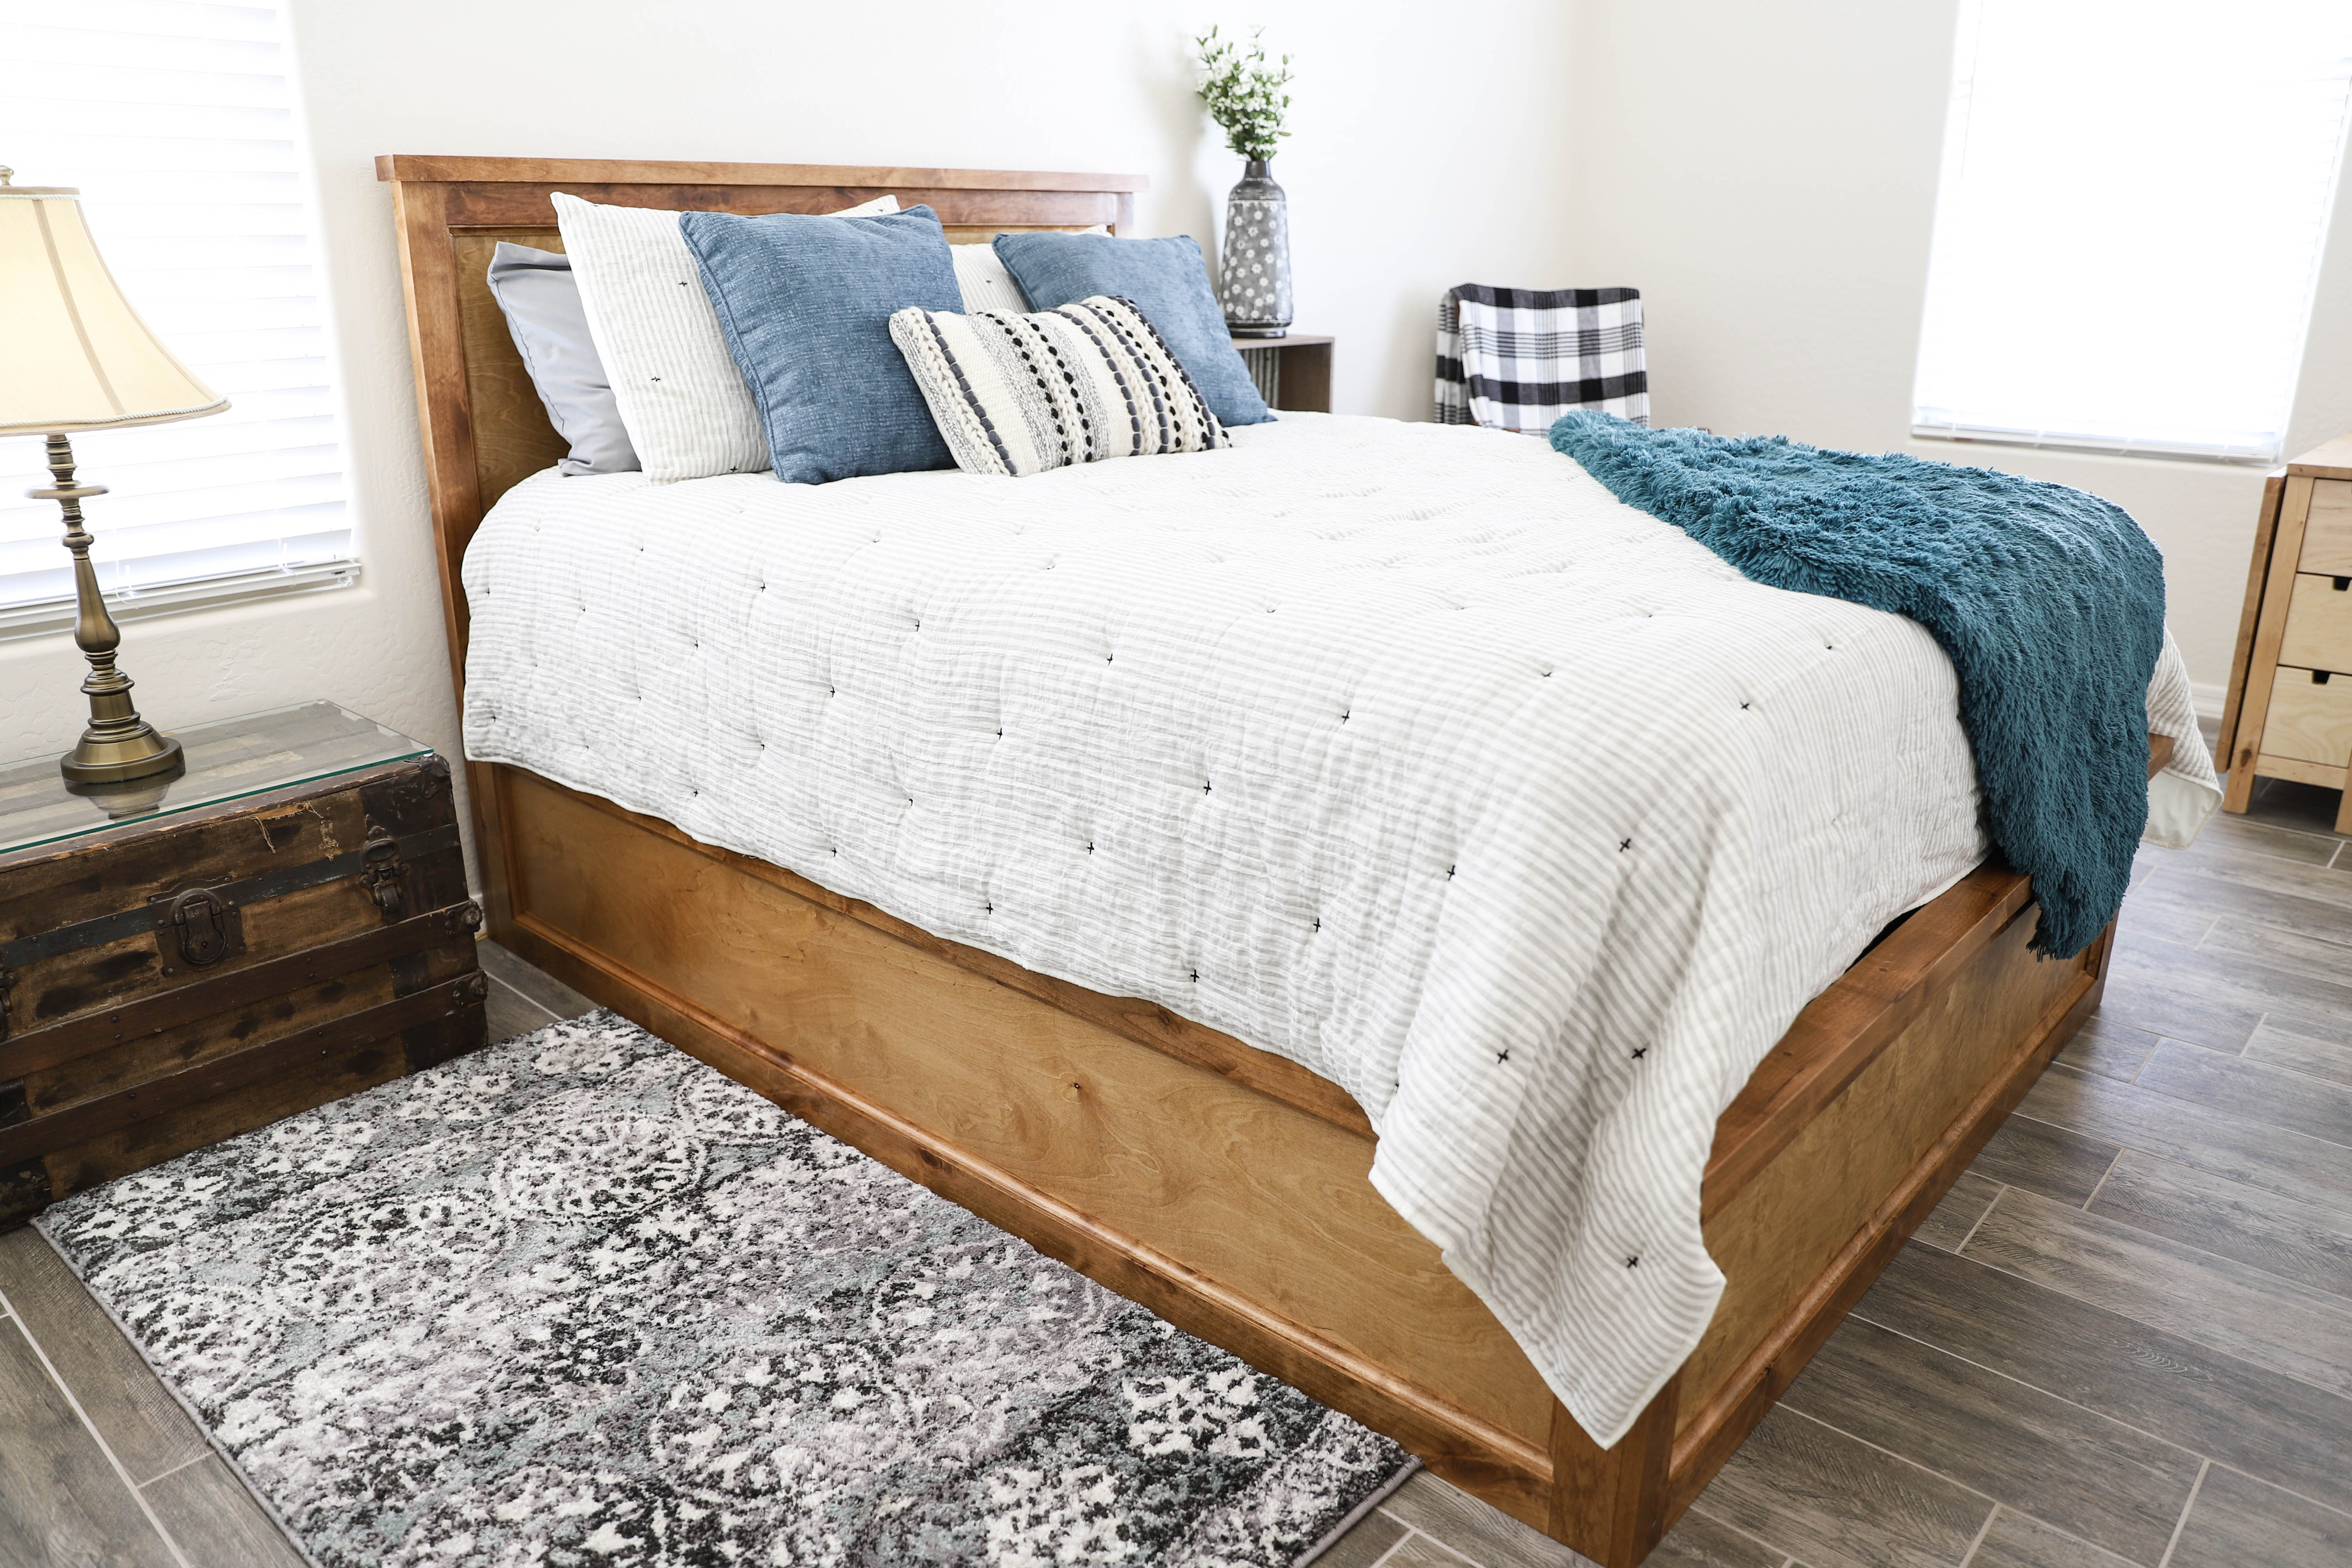 How To Build A Queen Size Storage Bed, Diy Lifting Bed Frame